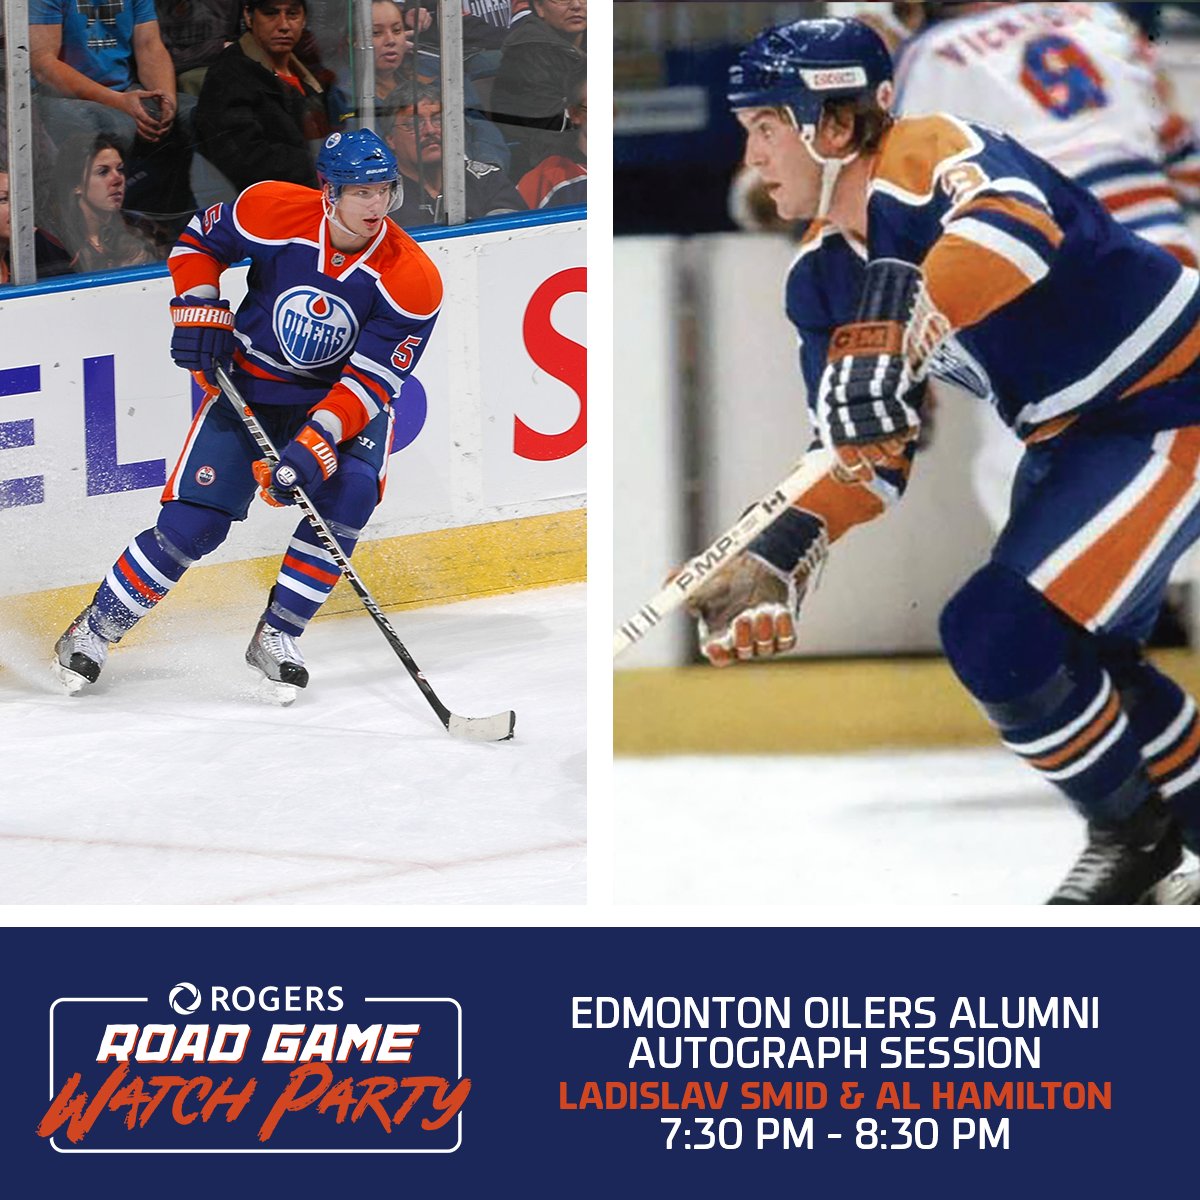 ✍️ ALUMNI UPDATE!! ✍️ @EdmontonOilers alumni Ladislav Smid & Al Hamilton will be signing autographs at tomorrow's @Rogers Road Game Watch Party!⁠ ⁠ Limited tickets remain, get yours before they're gone! 🎫: RogersPlace.com/WatchParty